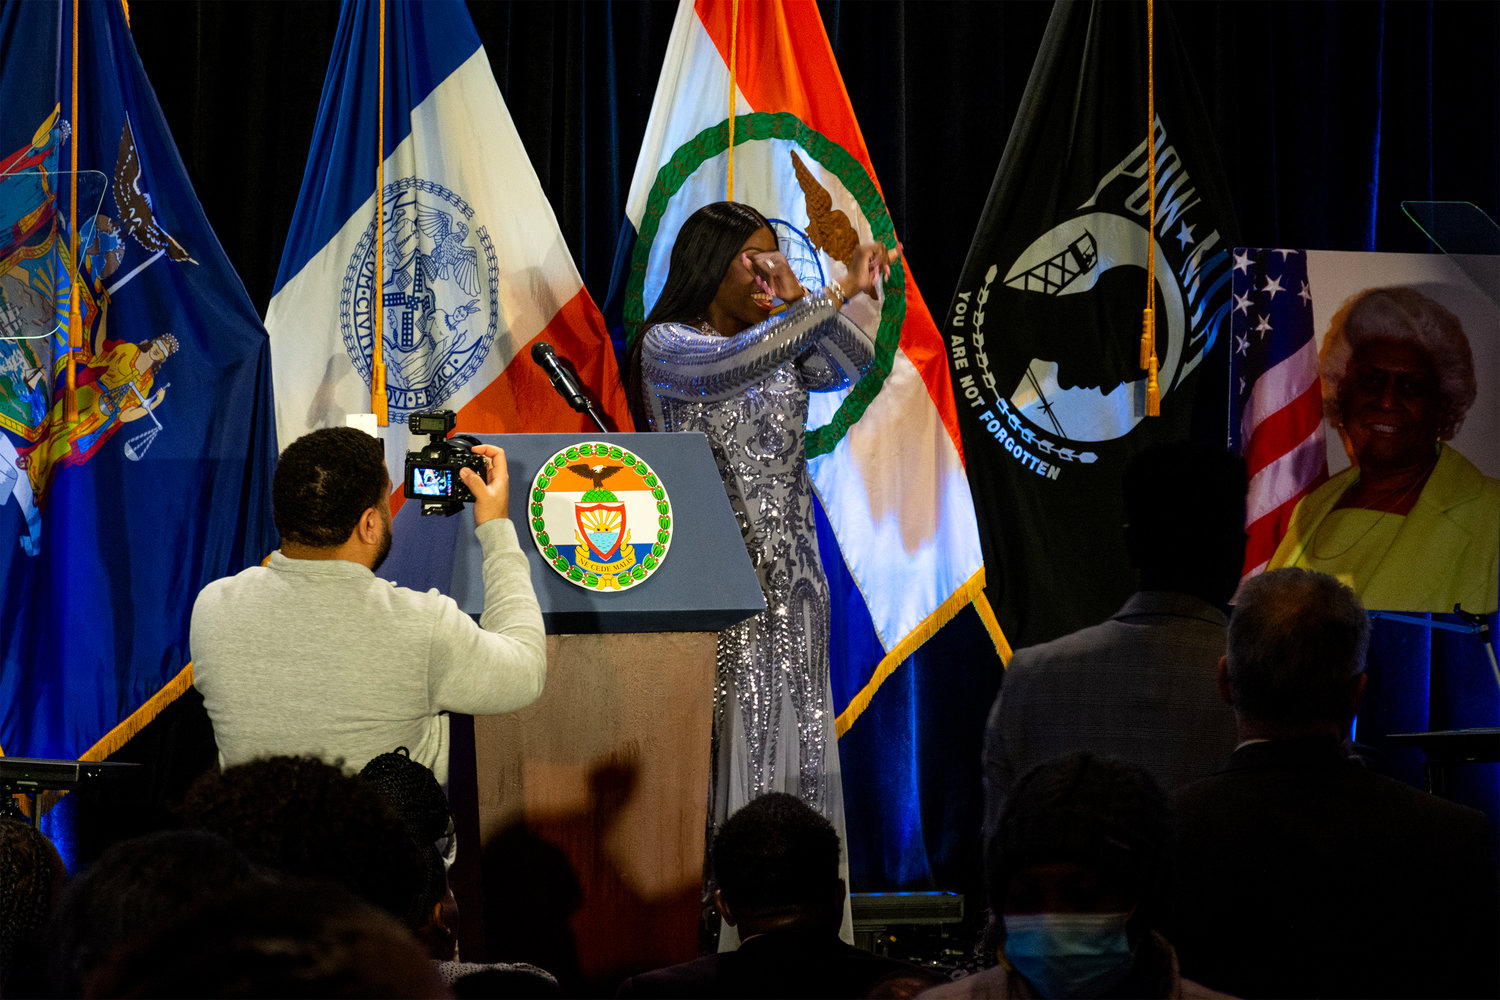 Borough president Vanessa Gibson signals a little Bronx pride during her address at Manhattan College’s Kelly Commons March 1. A portrait of the late Aurelia Greene – New York District 77 assemblywoman and Gibson’s political mentor – is propped behind her.